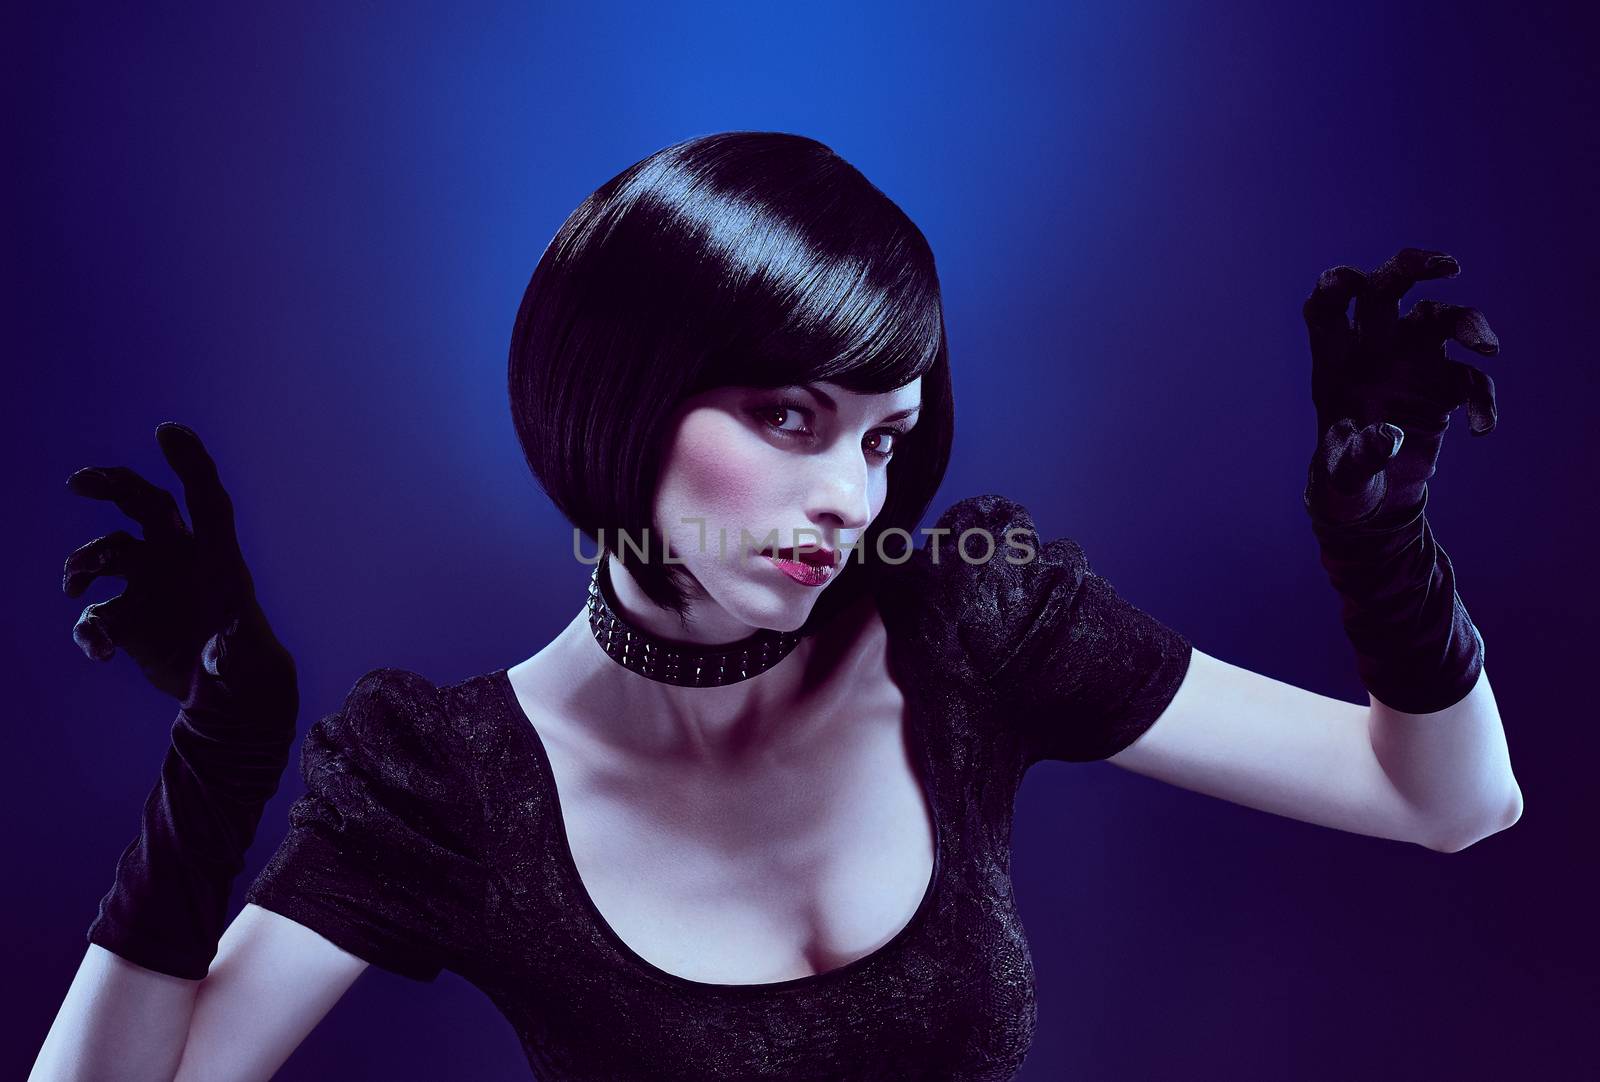 Fashion beauty sexy brunette woman with silky bob hairstyle in black dress, tights, gloves. Sensual lady in stylish sunglasses and necklace. Unusual creative mysterious people. Blue dark background